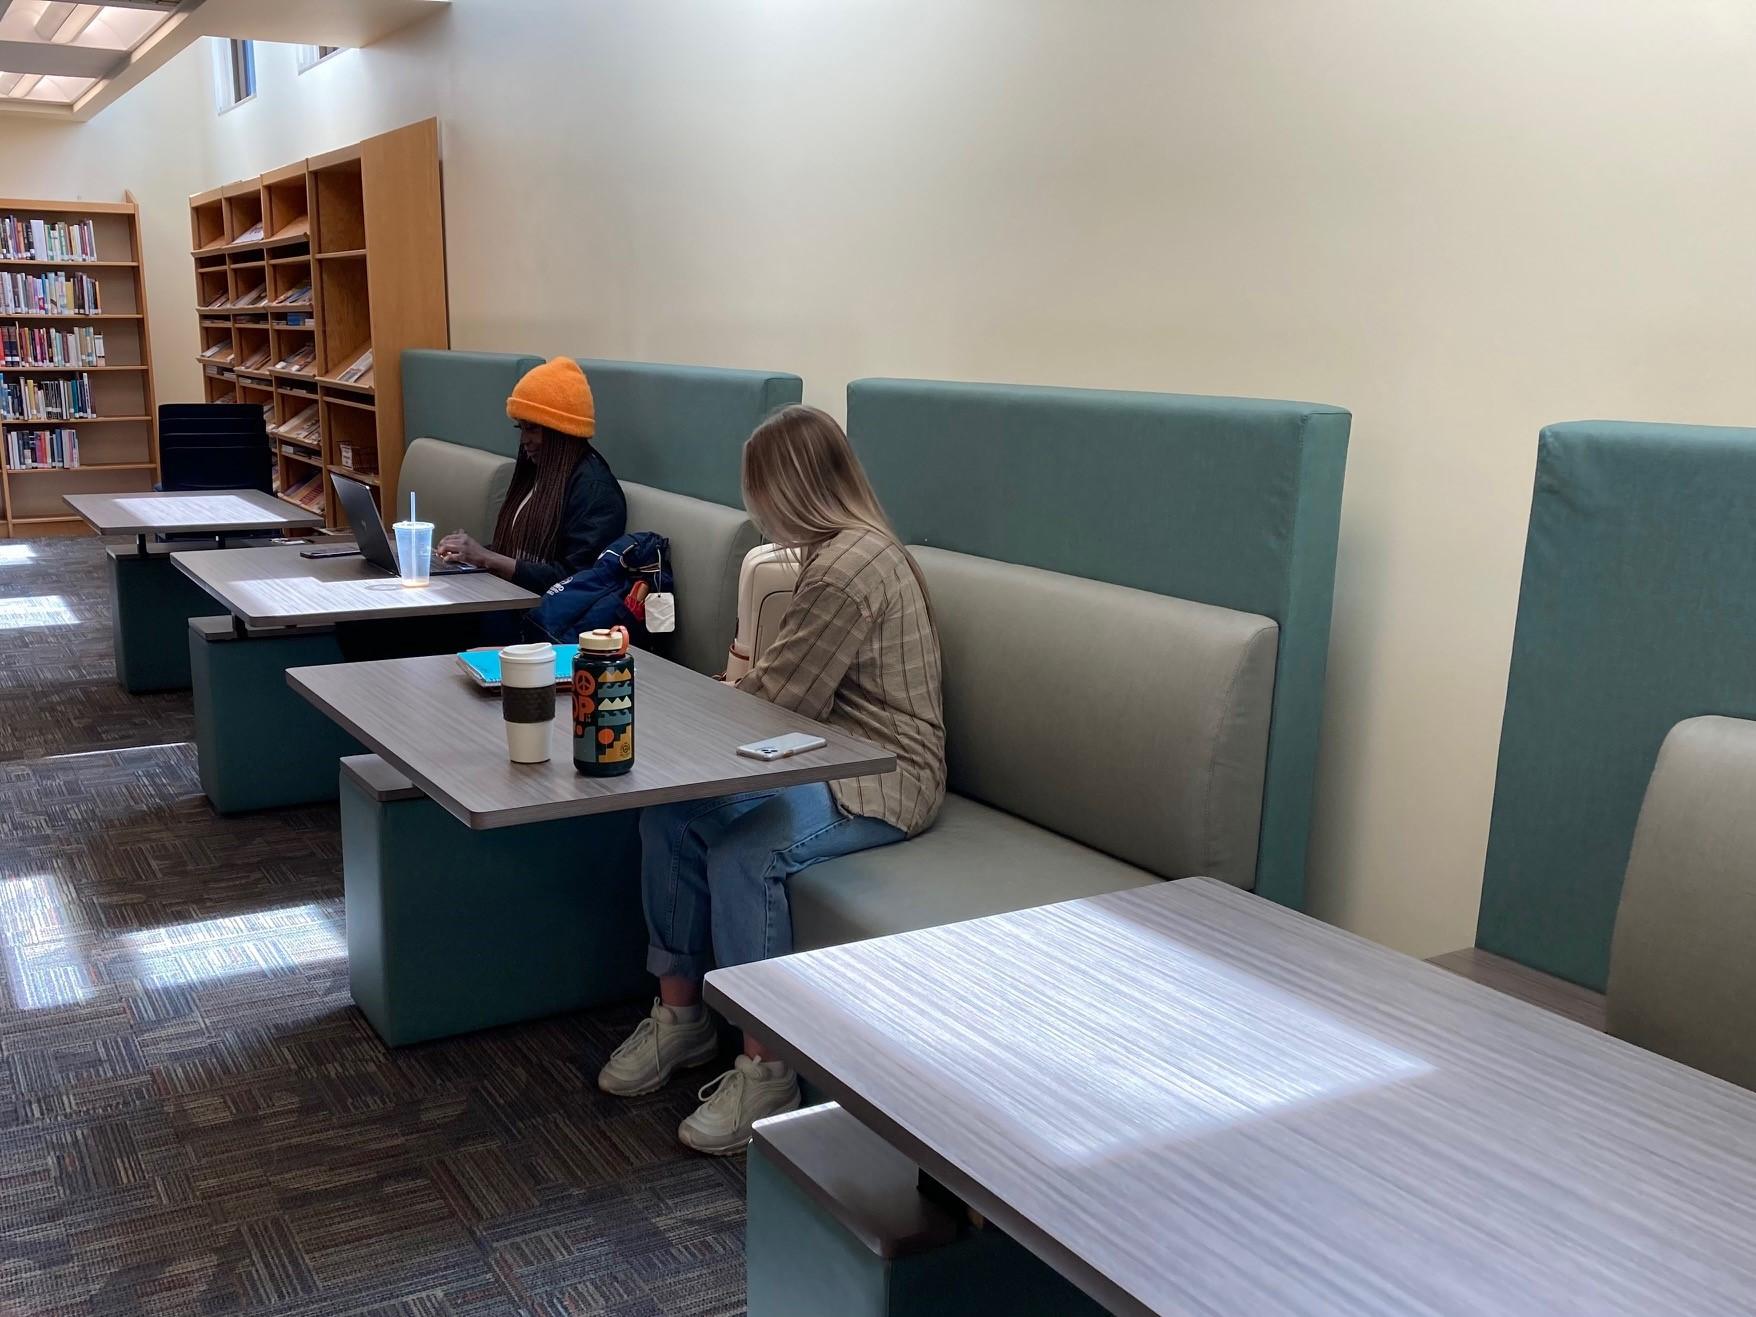 Students seated at new booths in the library